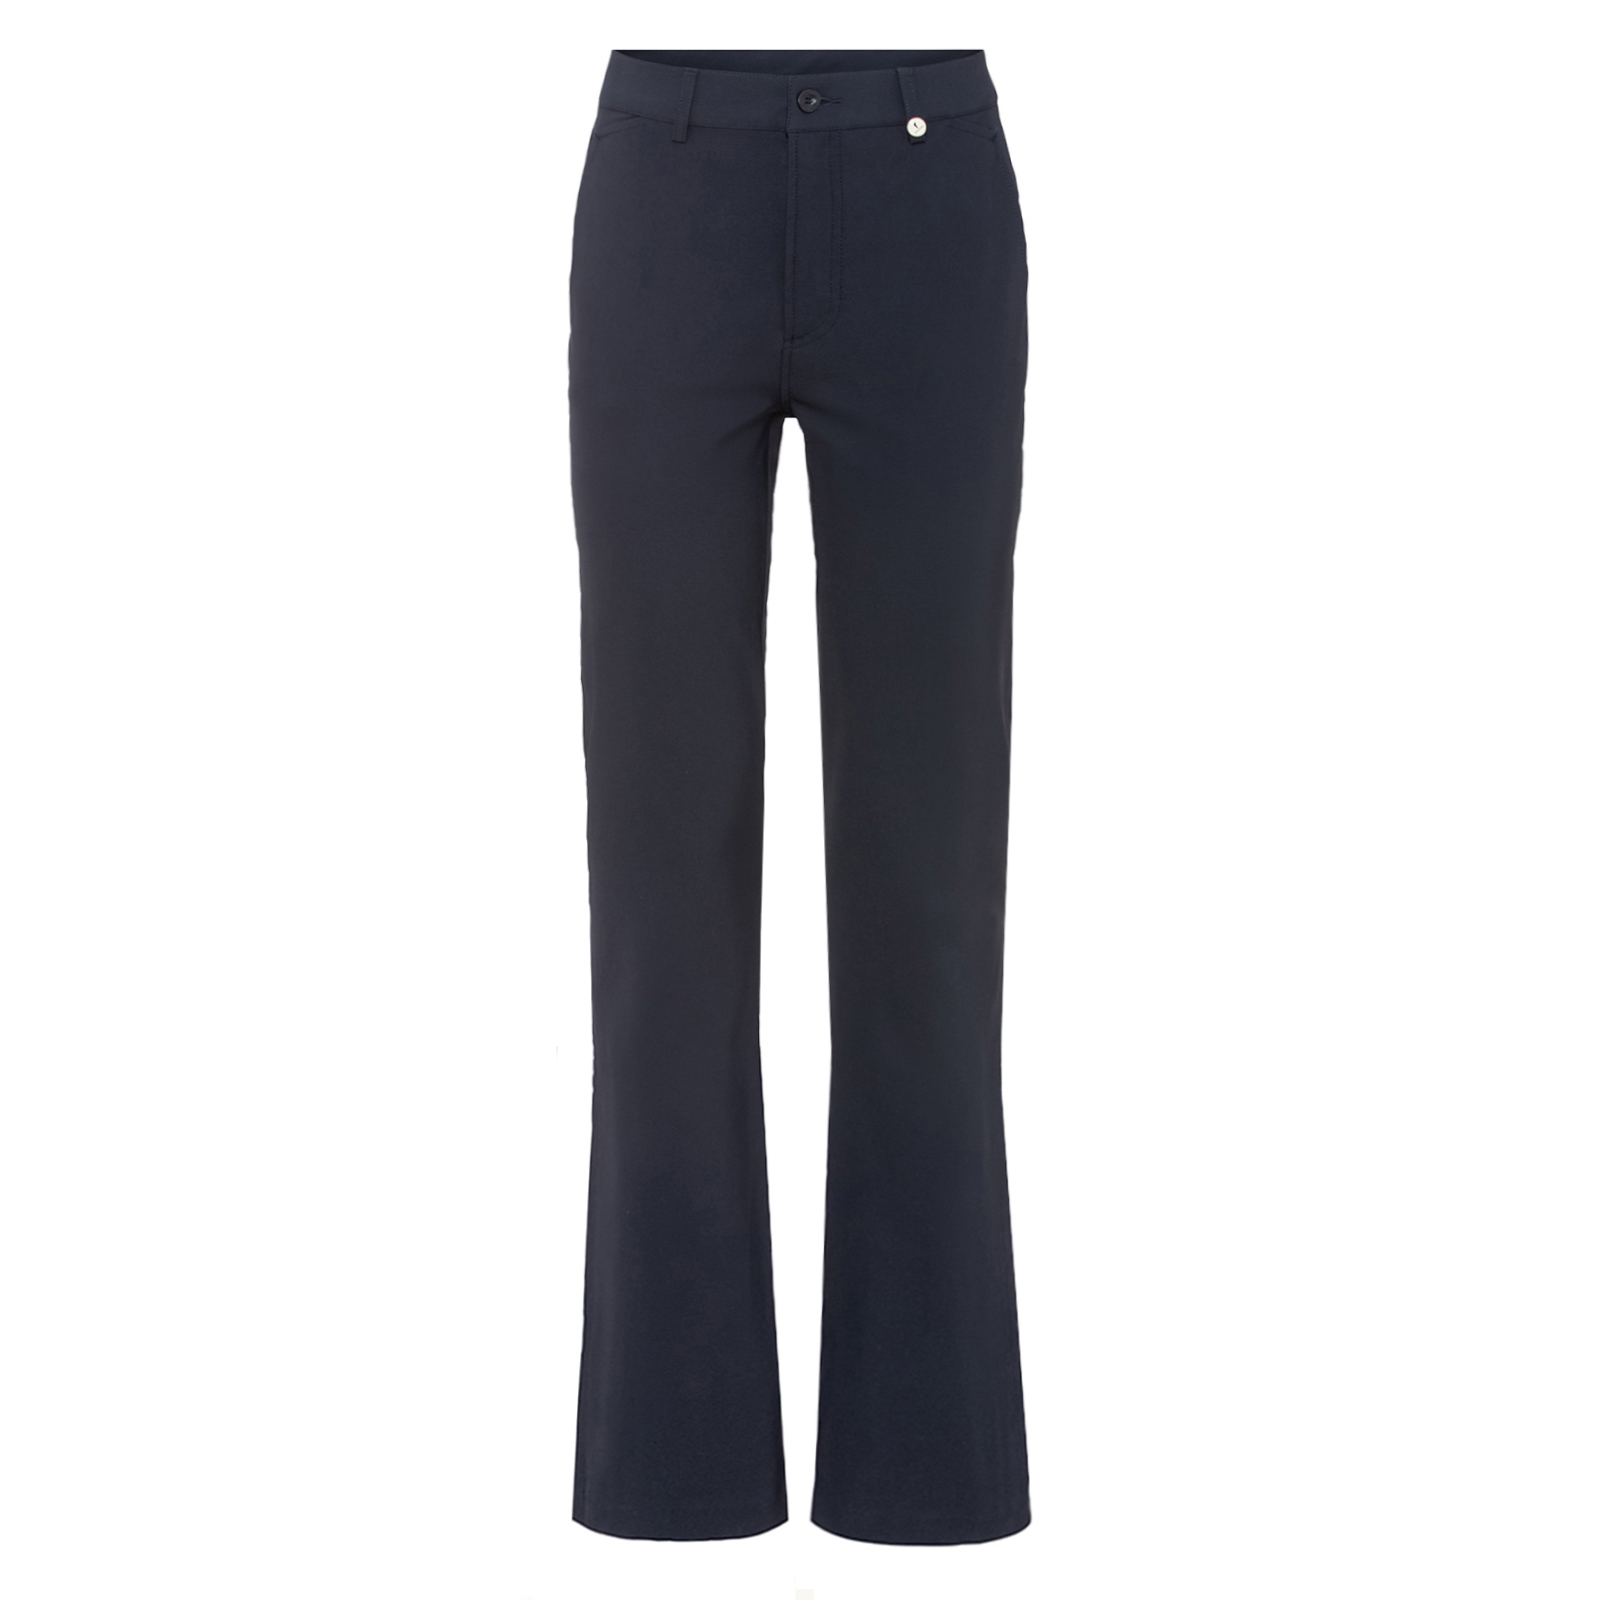 Ladies’ 4-way stretch boot-cut golf trousers